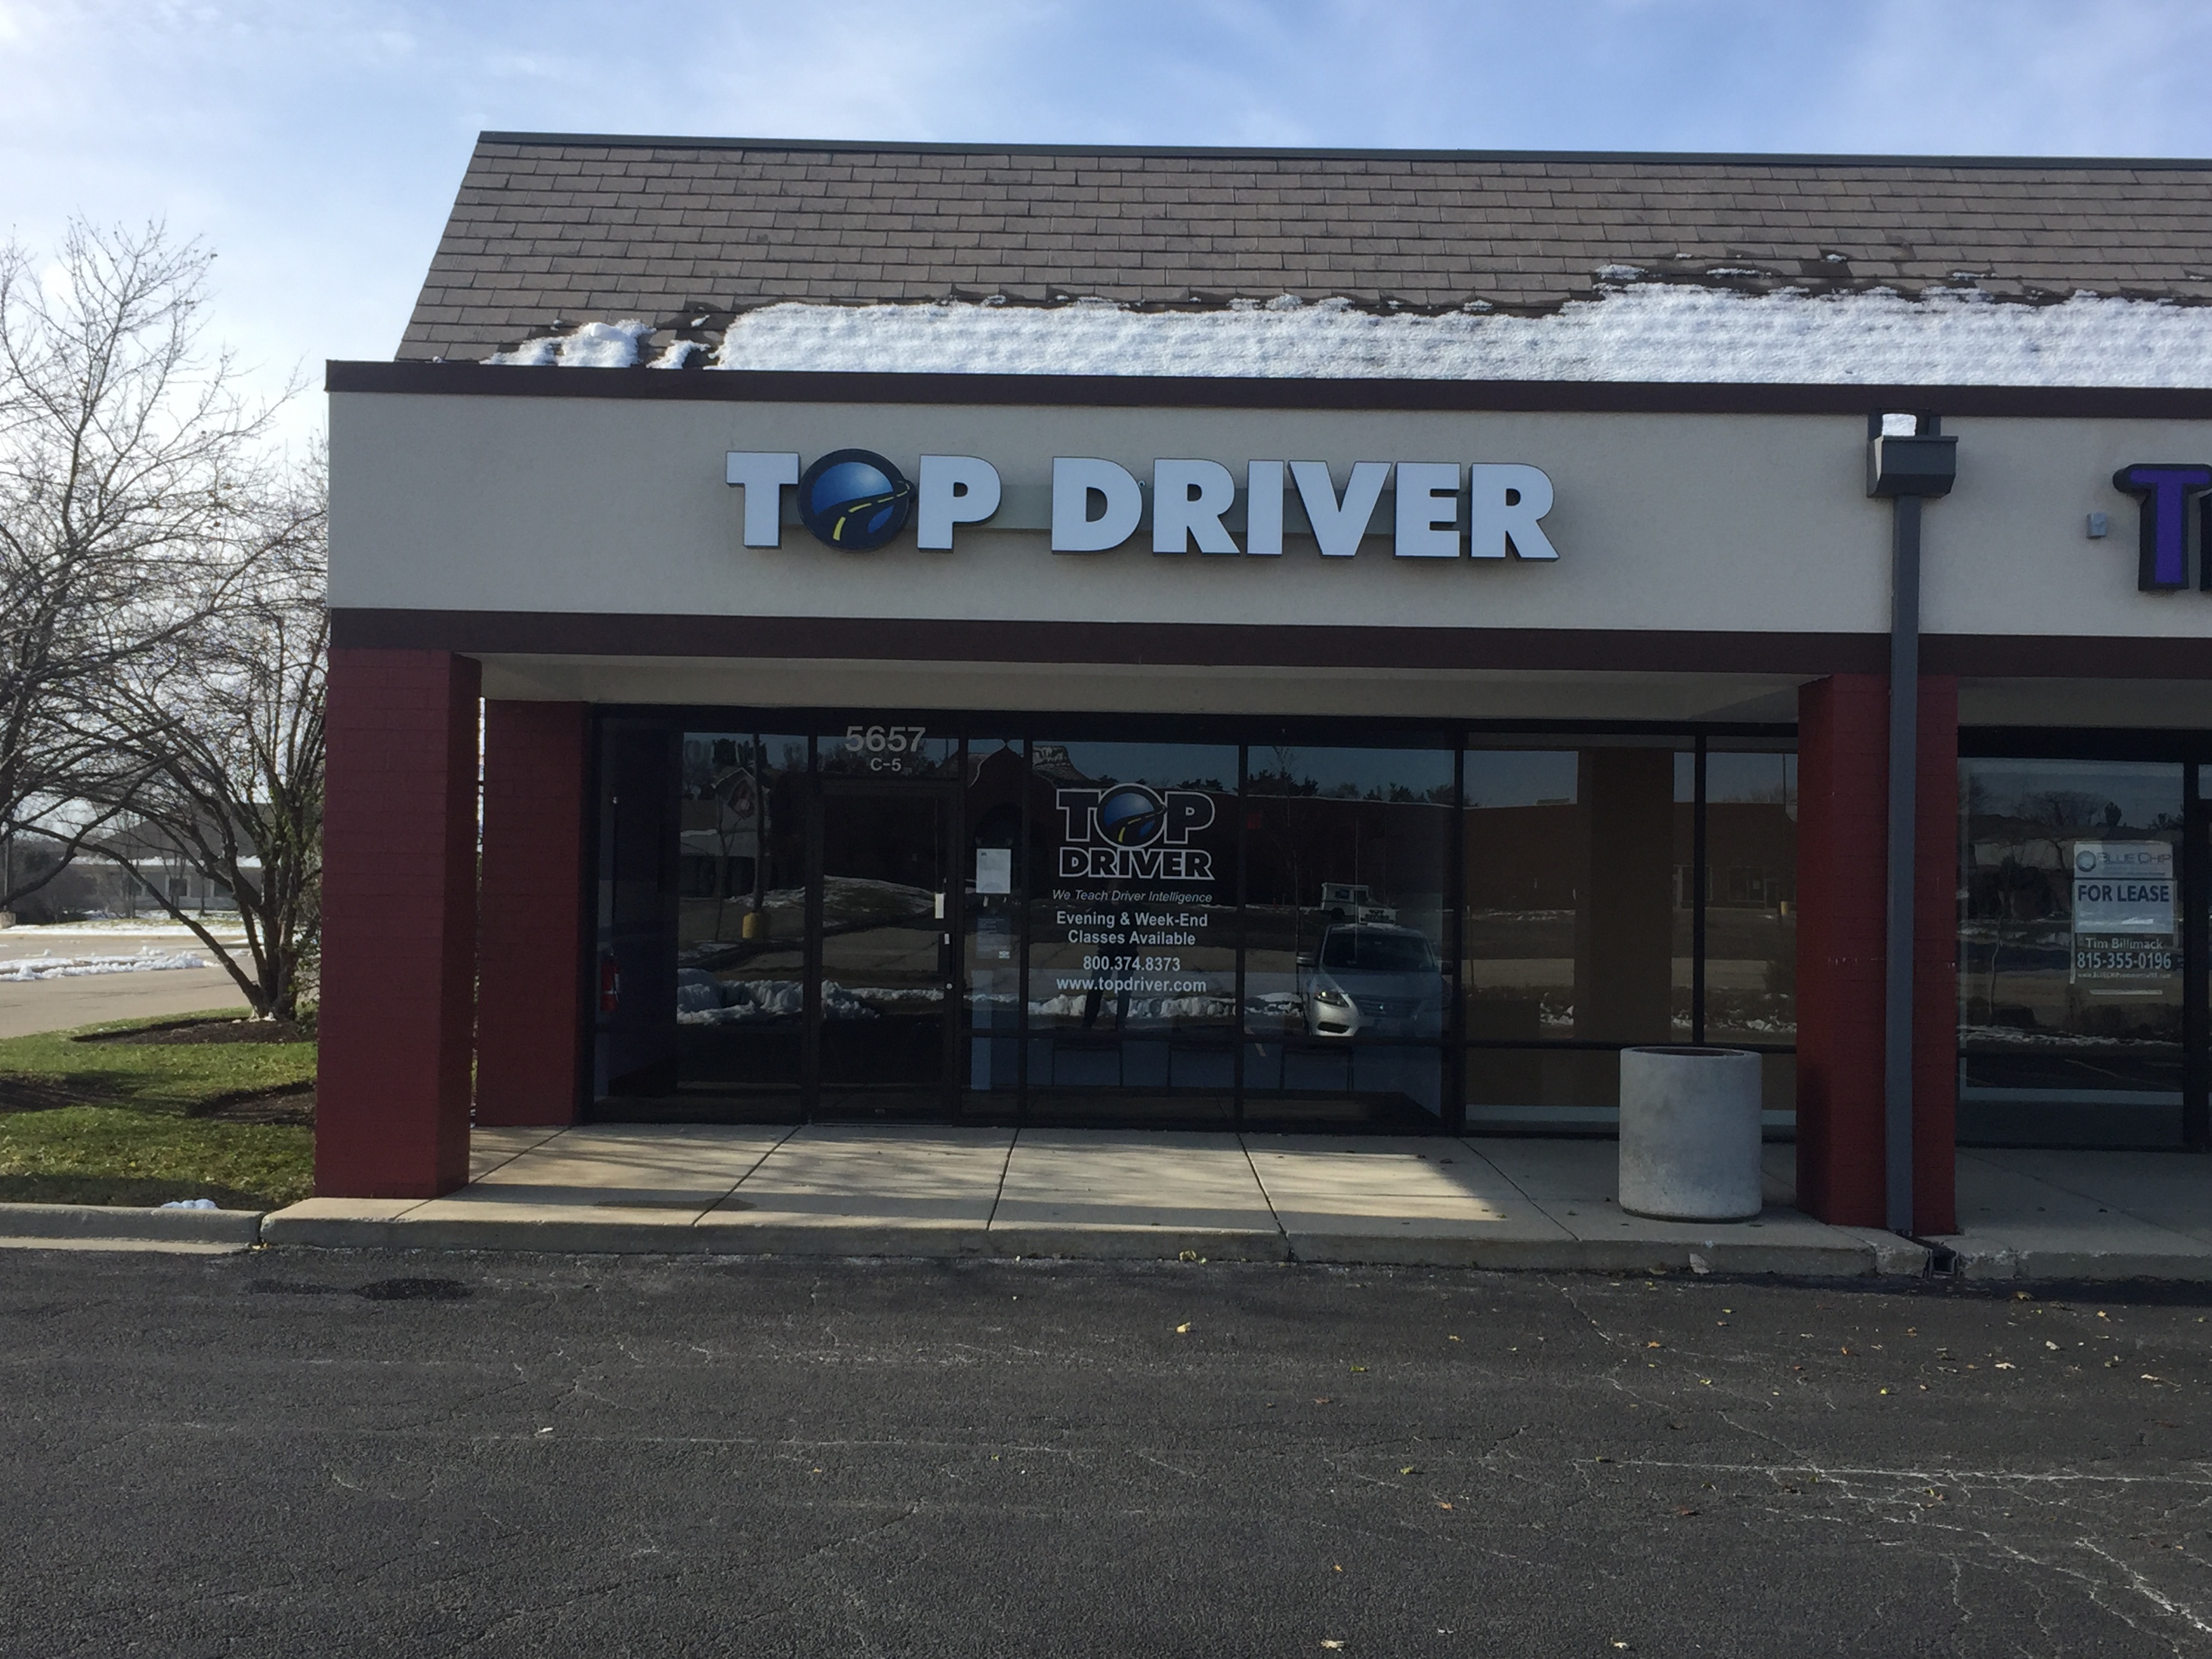 Top Driver Storefront in Crystal Lake, IL.